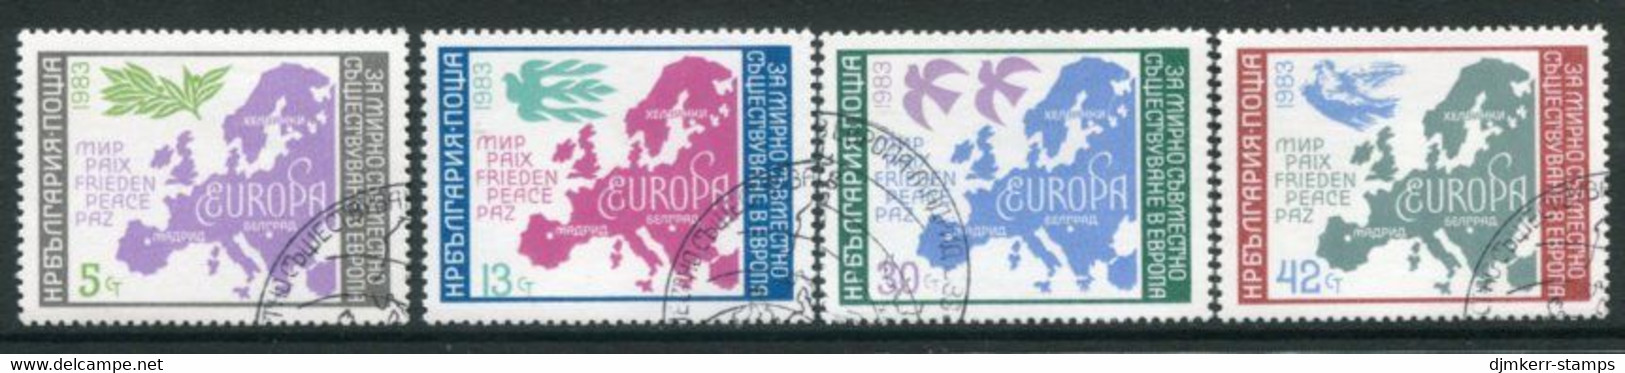 BULGARIA 1983  European Security Conference Used.  Michel 3218-21 - Used Stamps